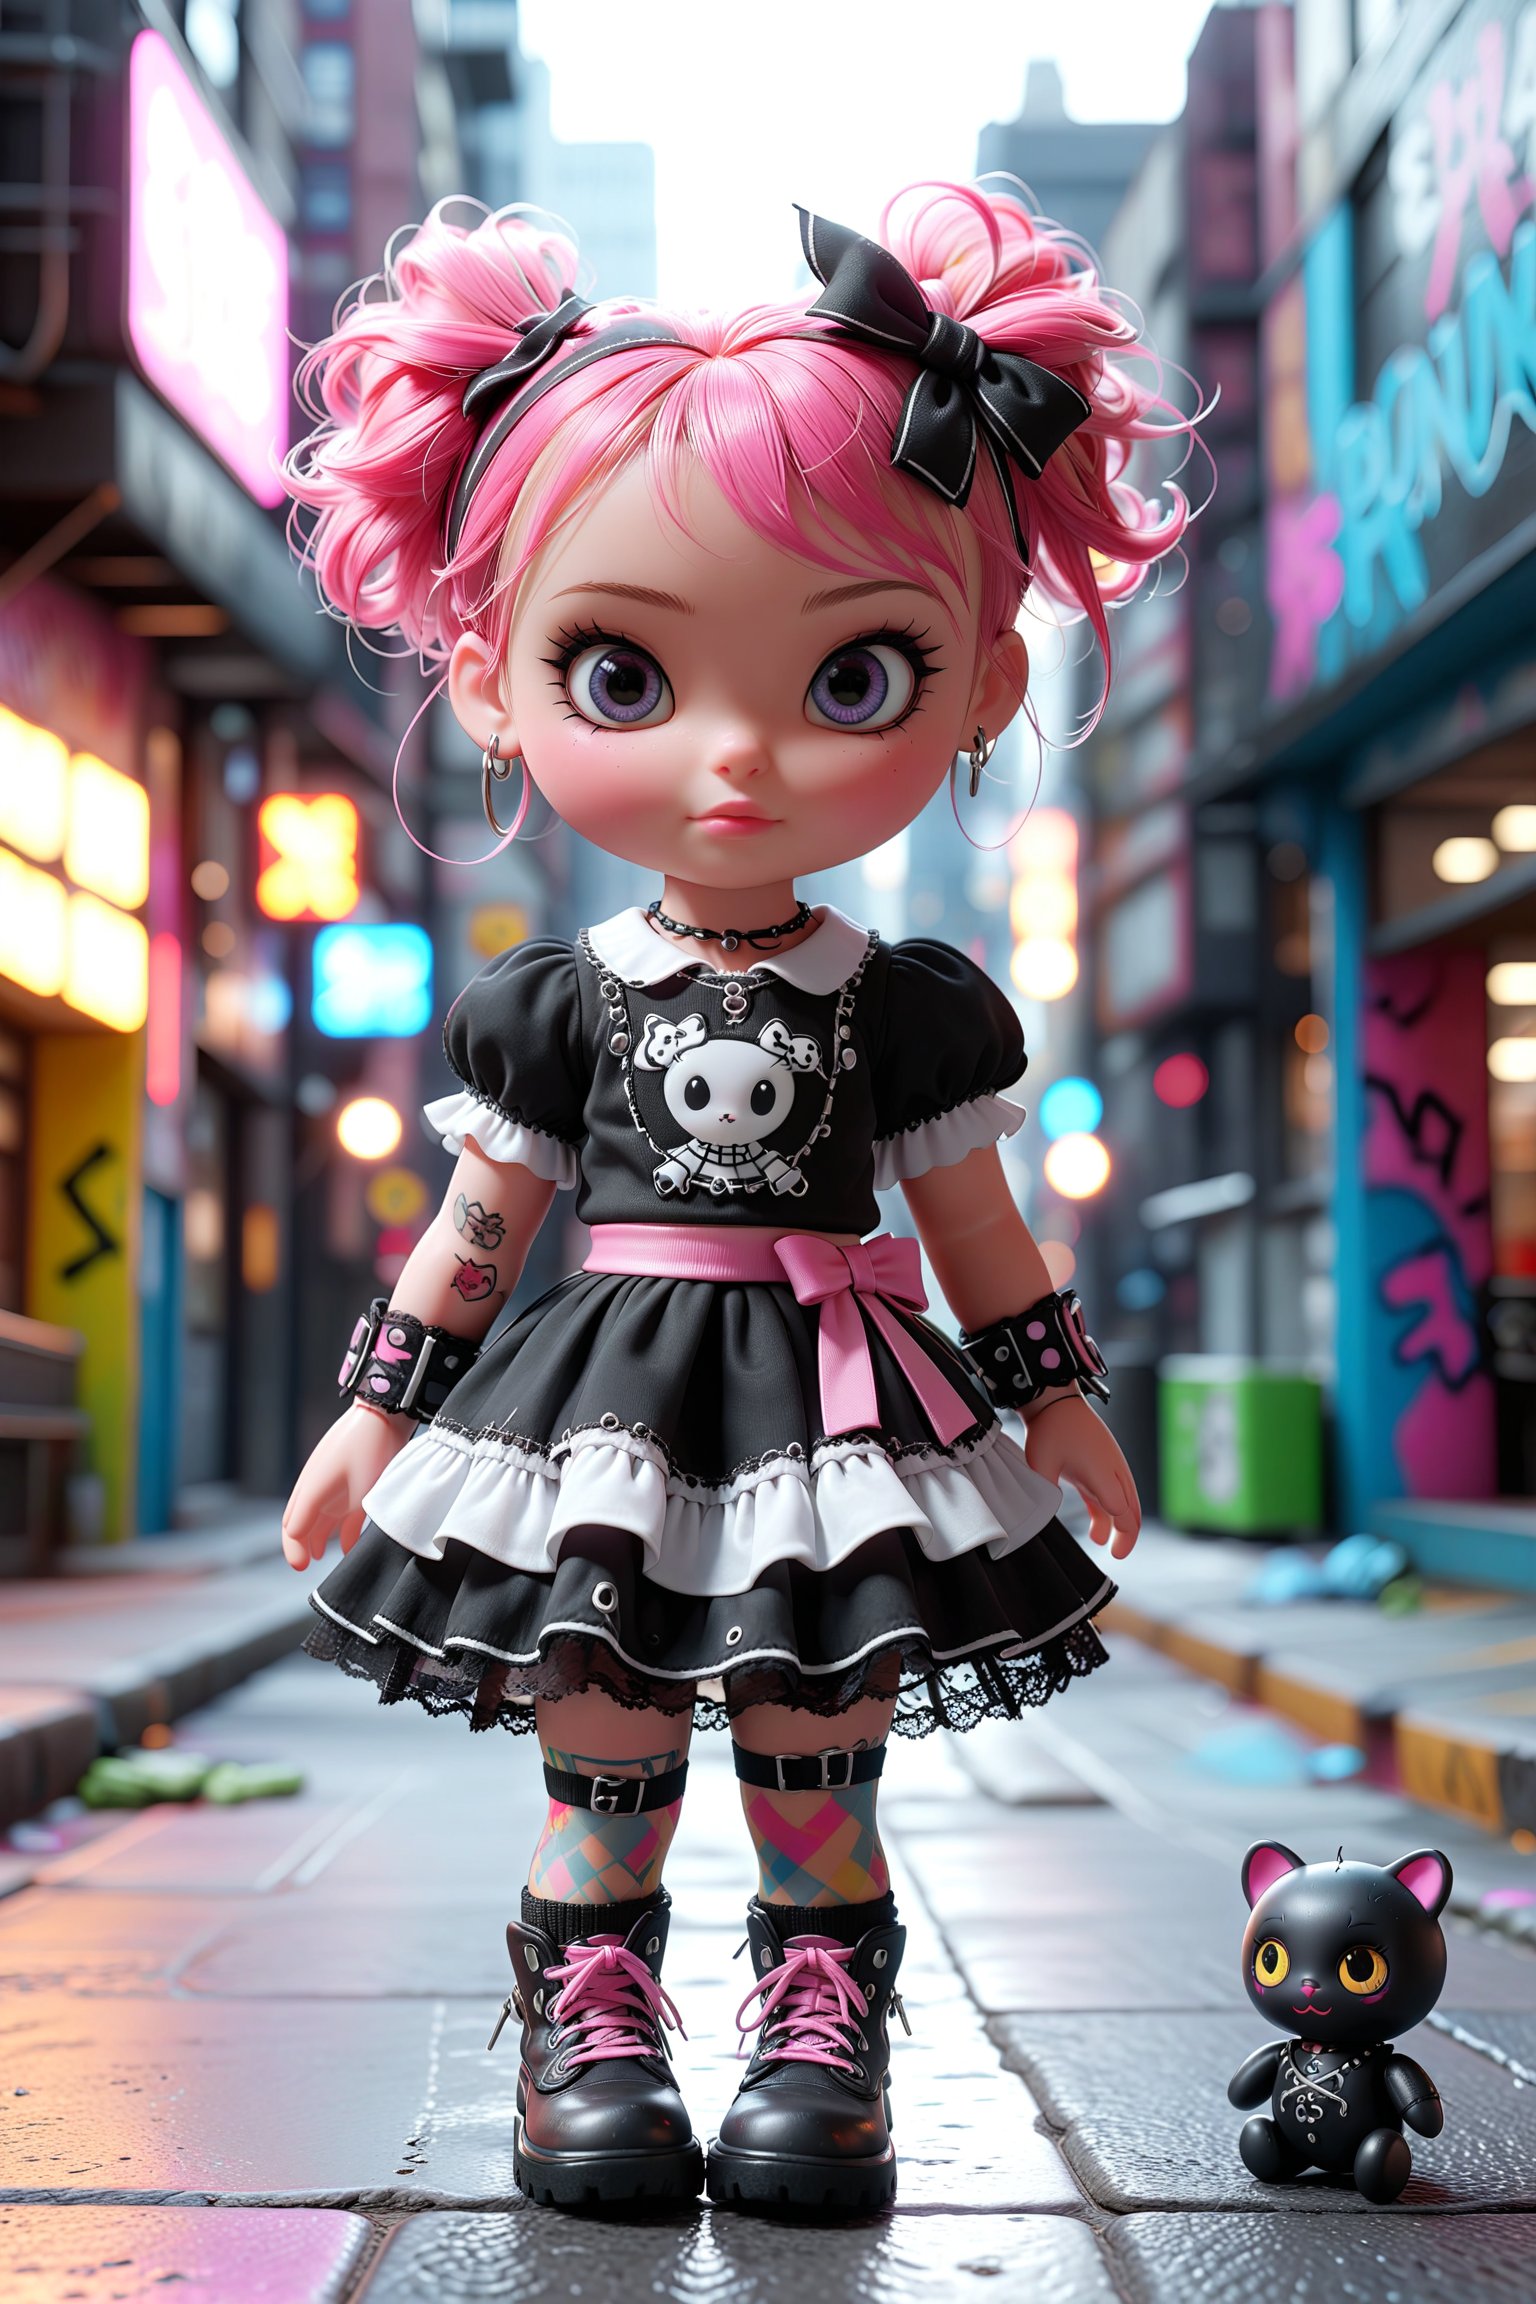 (masterpiece, 3d, doll model, toy, tiny cute, digital art, dynamic light & pose, ethereal quality, More Reasonable Details, vibrant lighting, colorful, light particles), A girl in Punk Lolita fashion, combining Lolita elements with punk aesthetics. She wears a plaid dress with lace details, fishnet stockings, and chunky boots. She poses confidently in a gritty urban setting, with graffiti-covered walls and a cityscape in the background